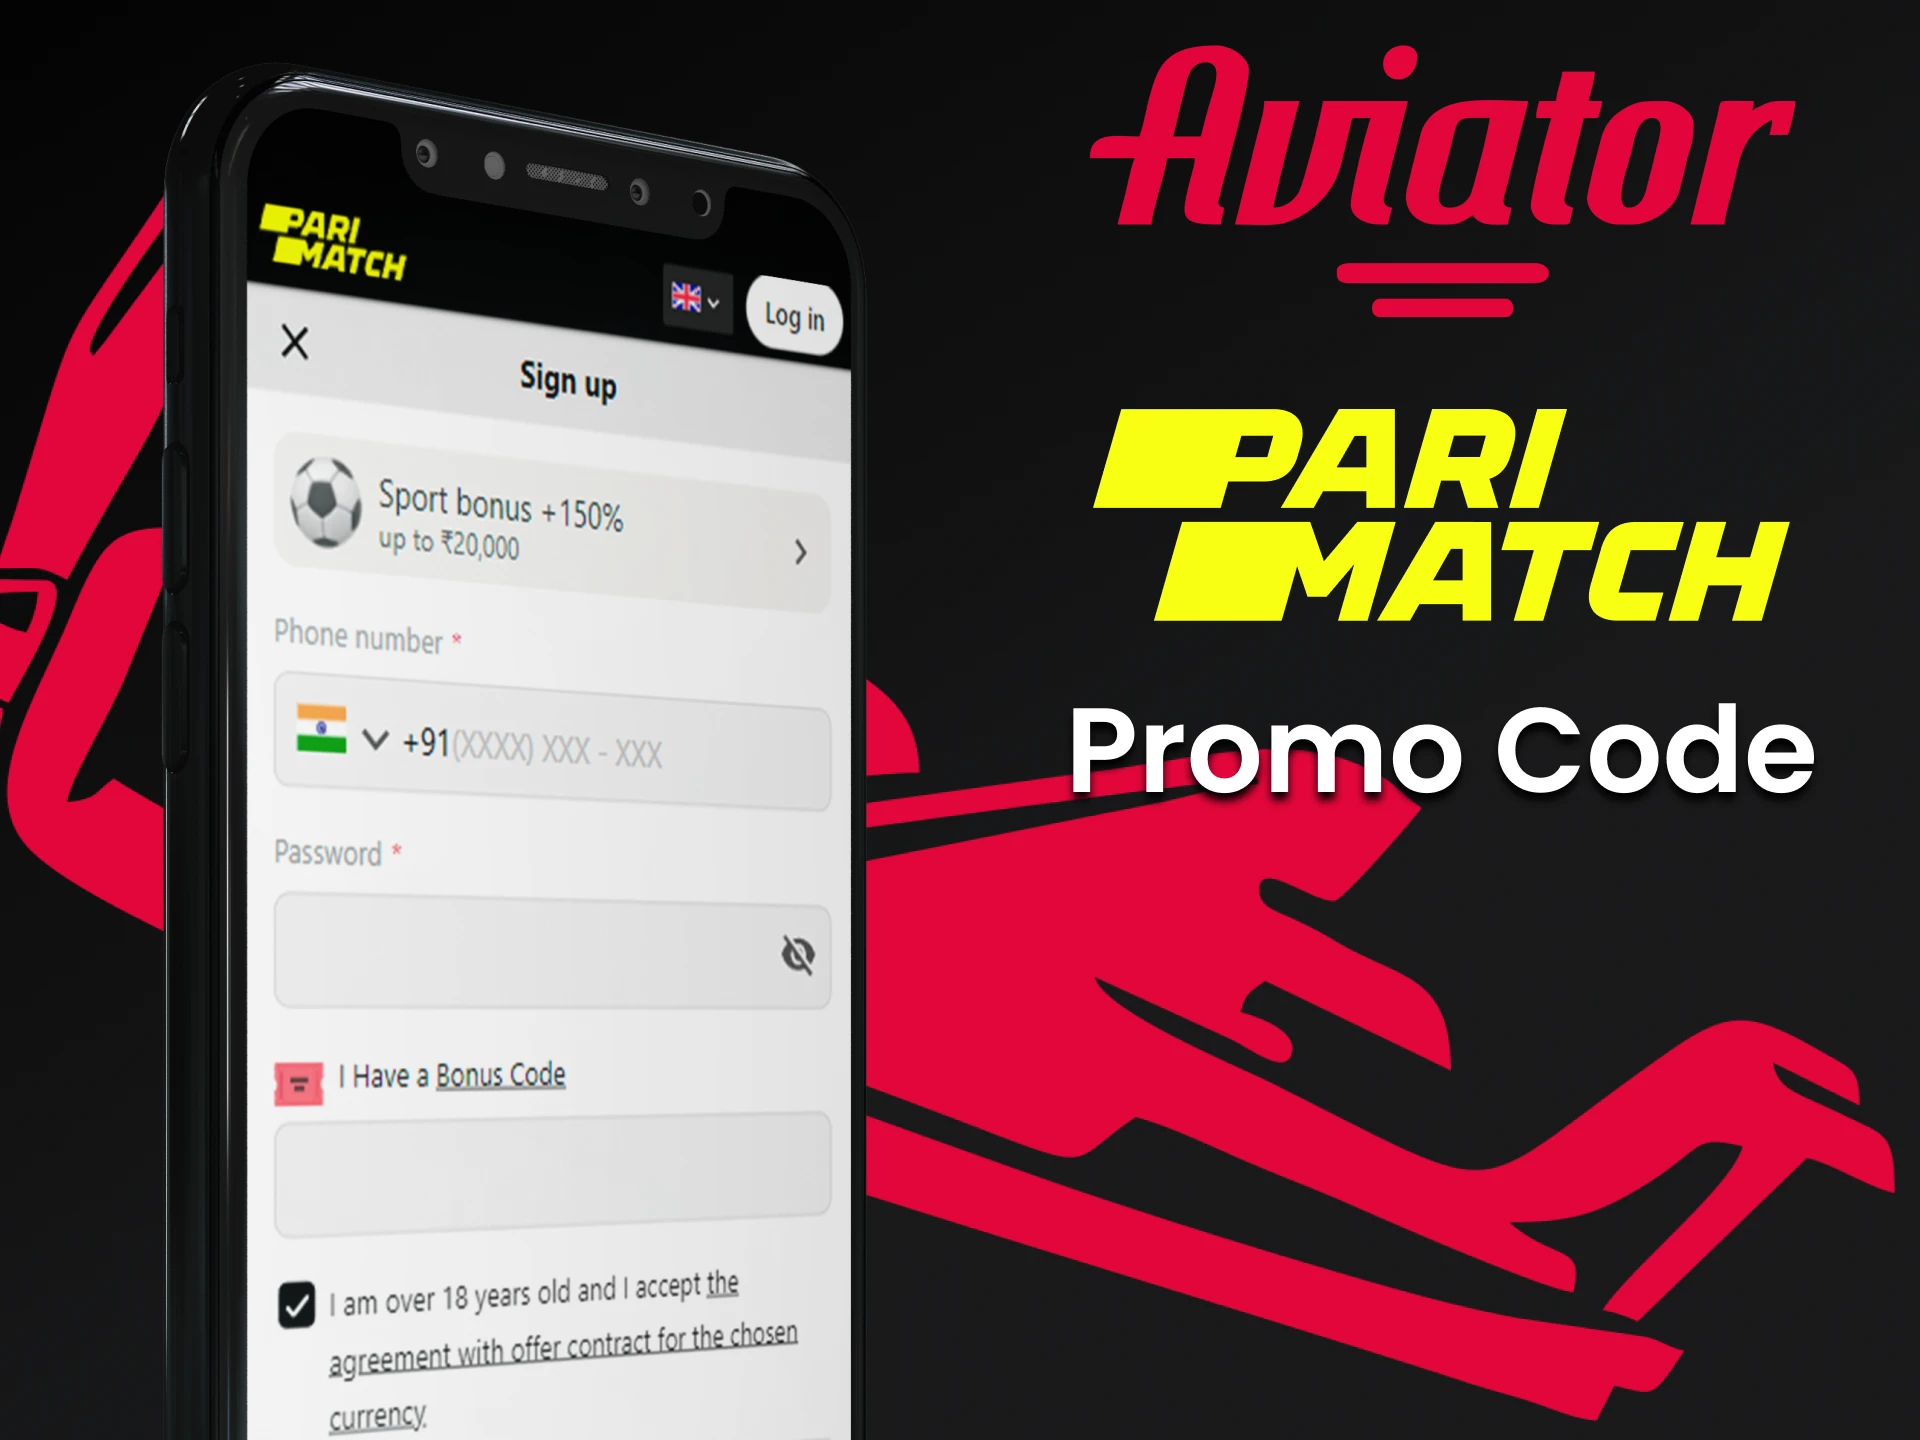 Use a special promo code from Parimatch to play Aviator.